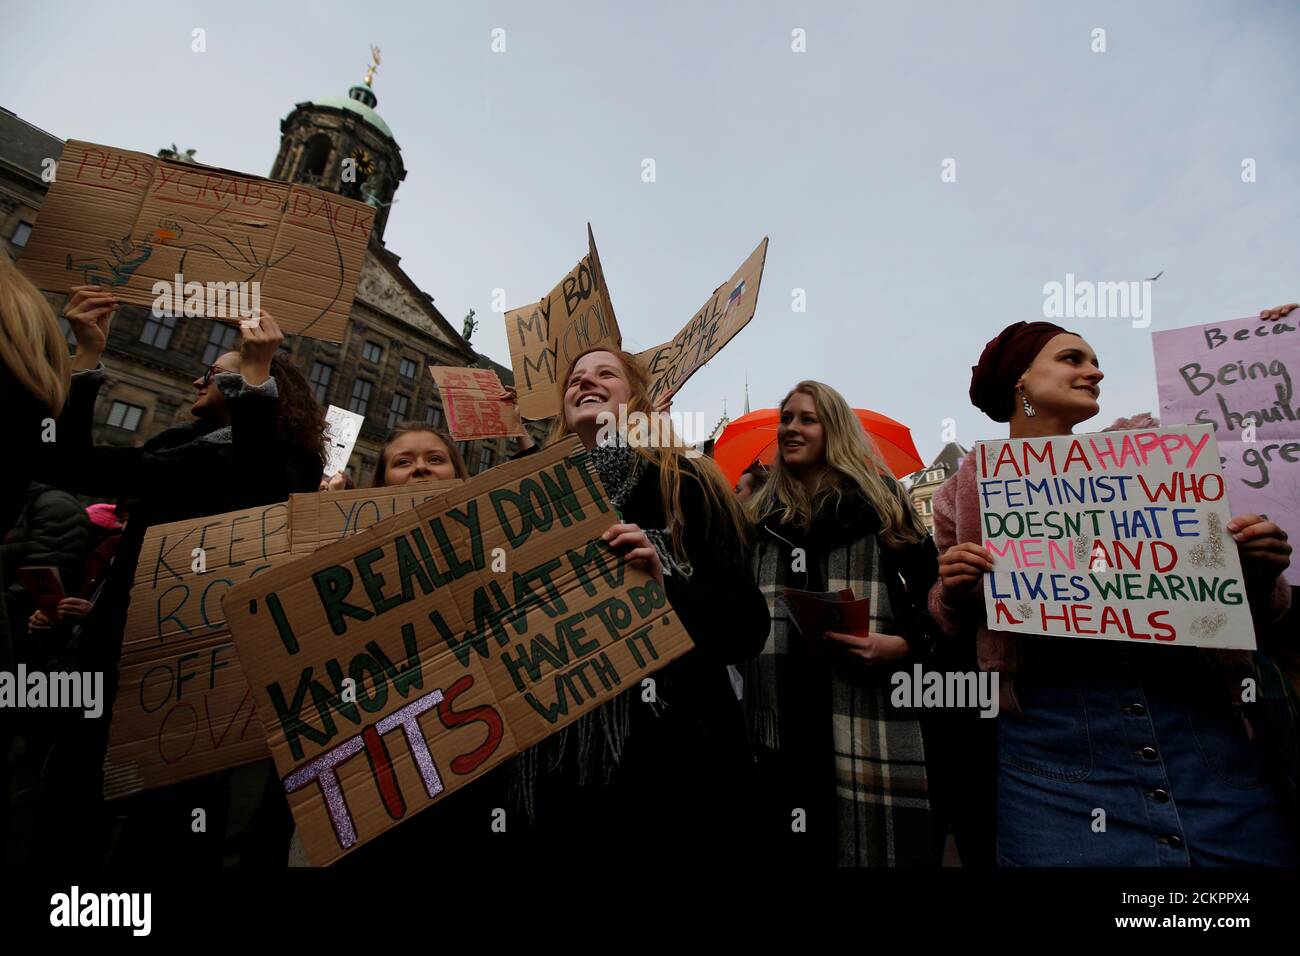 Demonstrators gather to urge public to vote against hate in Amsterdam, Netherlands, March 11, 2017. REUTERS/Cris Toala Olivares Stock Photo